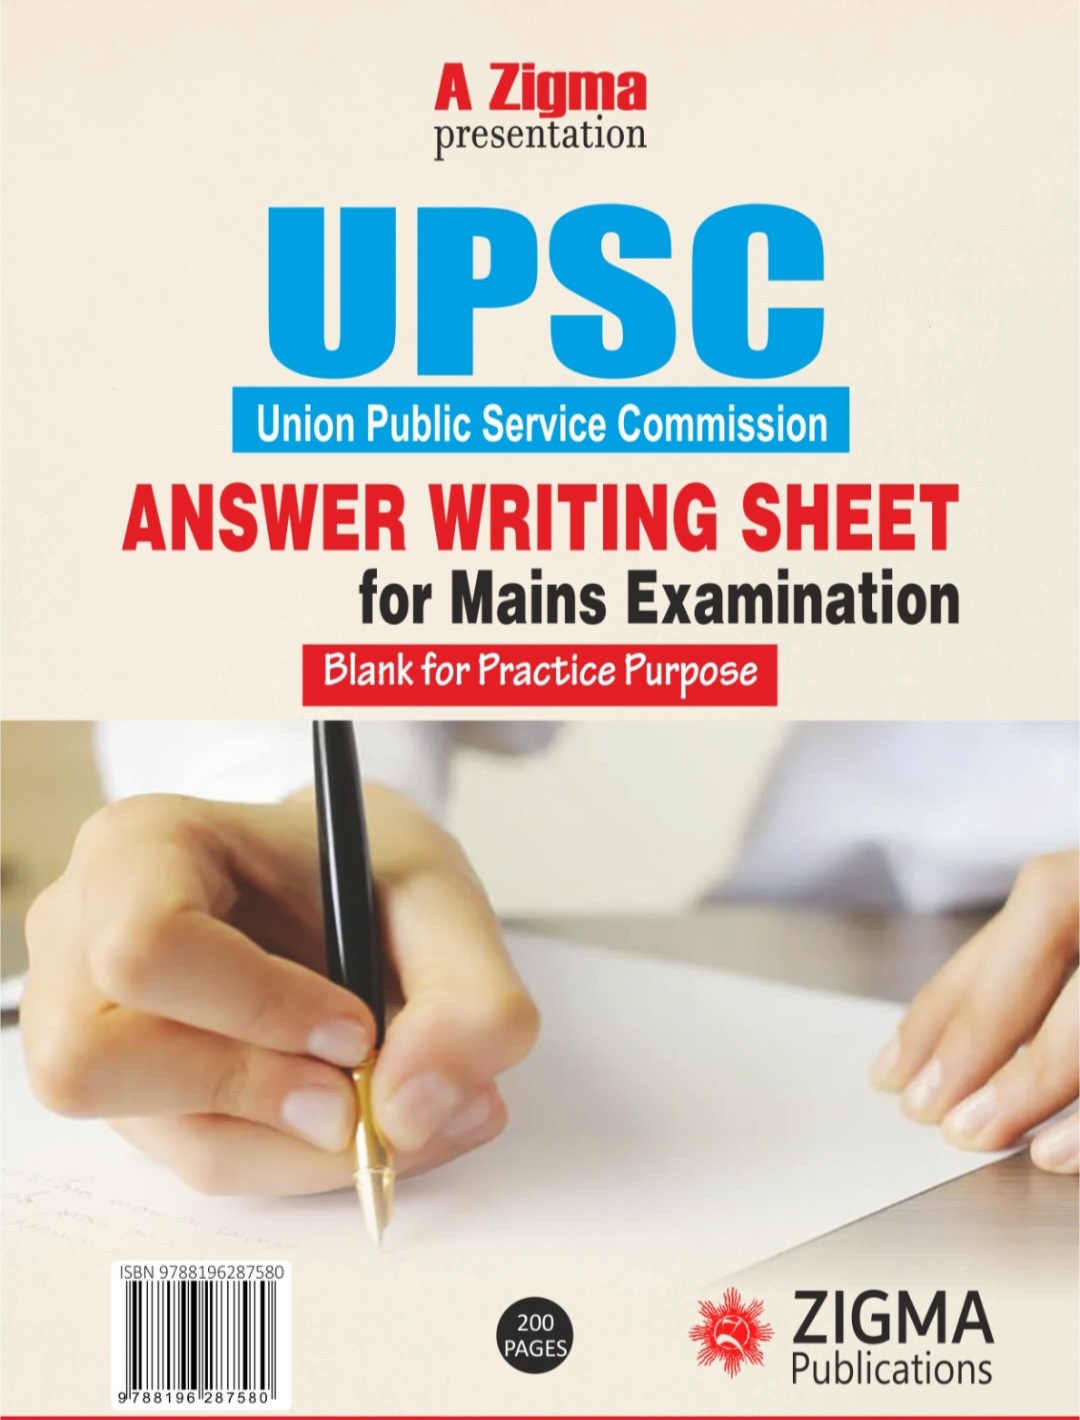 UPSC Answer writing sheet for Mains Examination ( Blank for Practice Purpose ) 9788196287580